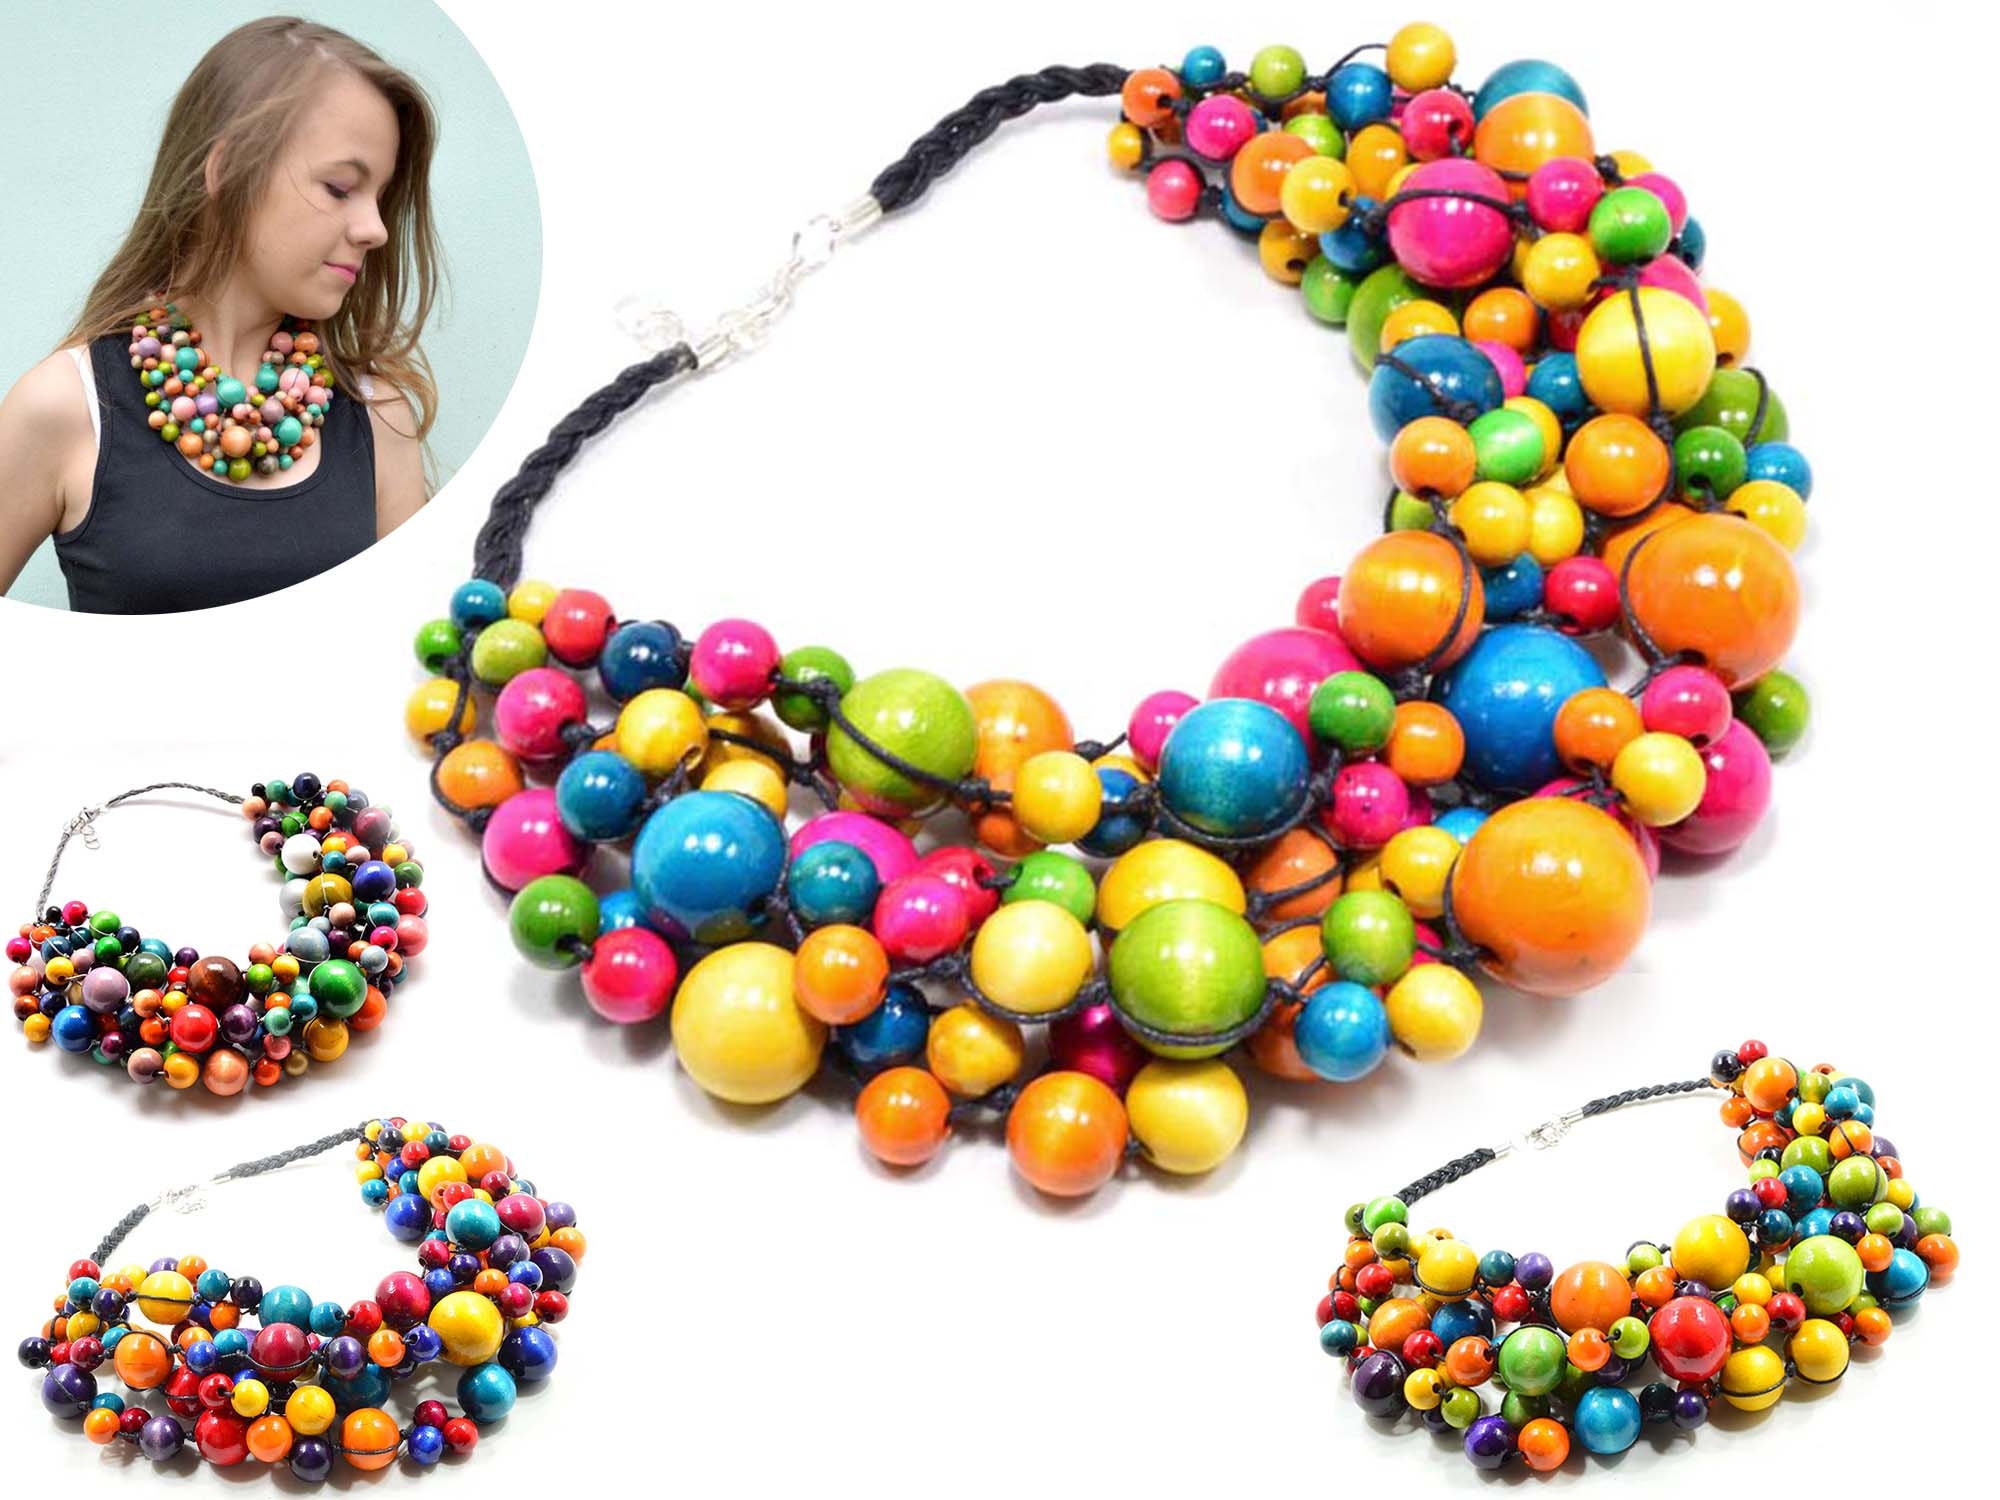 keusn beaded beads necklace resin colourful pink navy yellow beaded  statement choker necklace for men women - Walmart.com